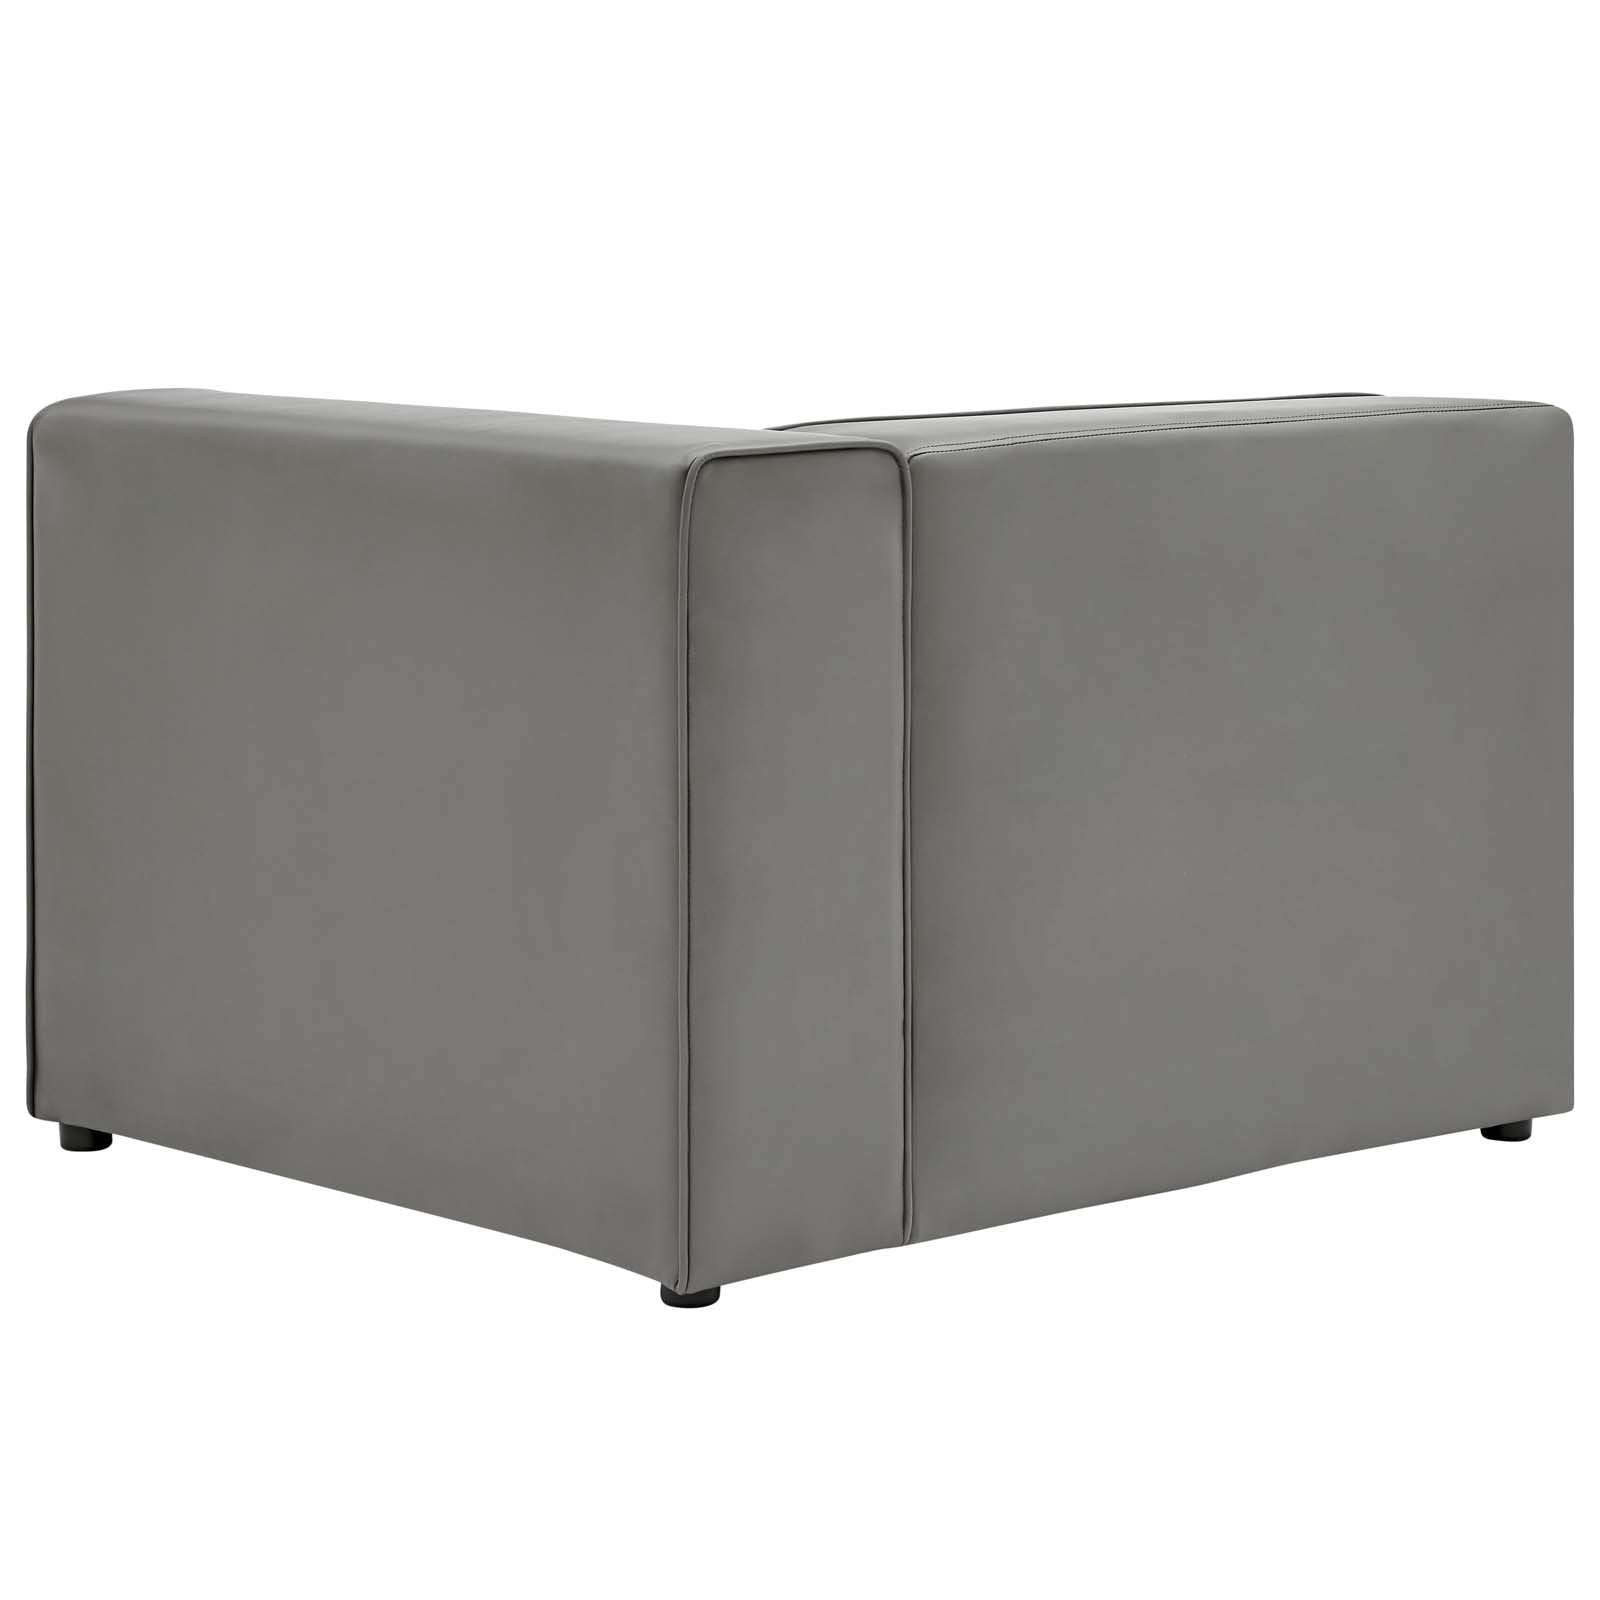 Mingle Vegan Leather Right-Arm Chair - East Shore Modern Home Furnishings